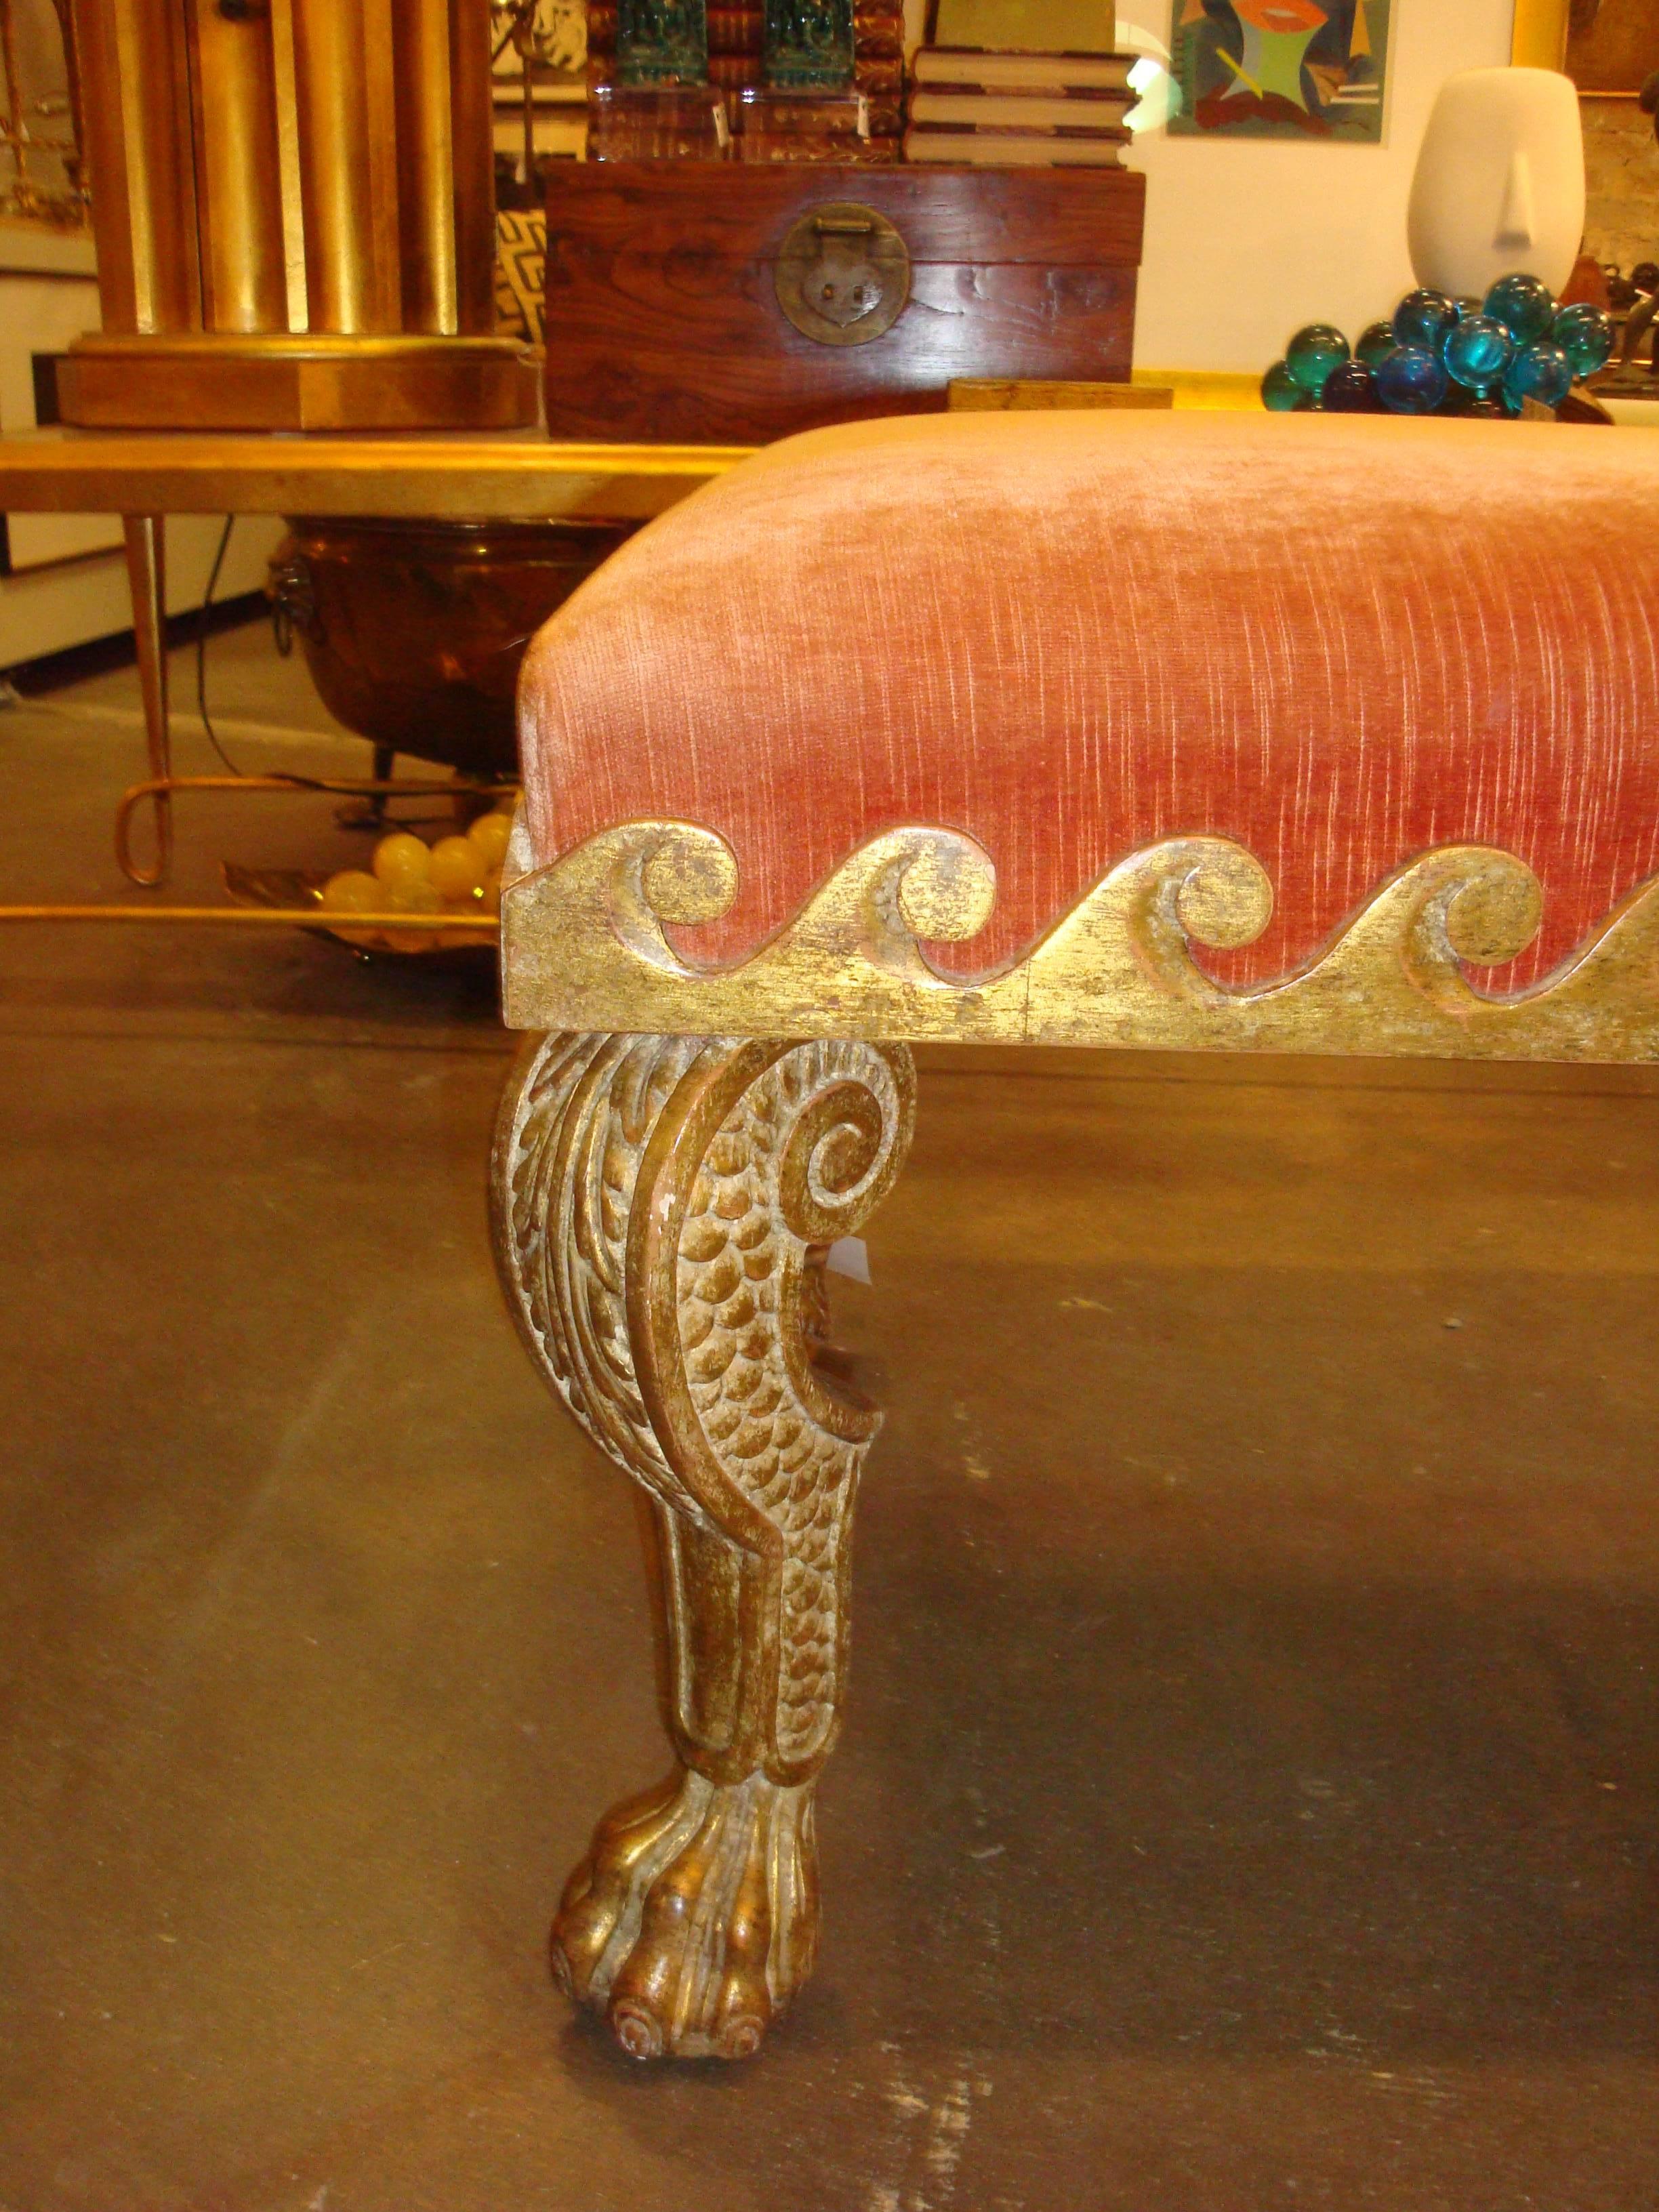 This is a giltwood scalloped bench with giltwood claw feet, covered in a coral colored velvet in 1990s.